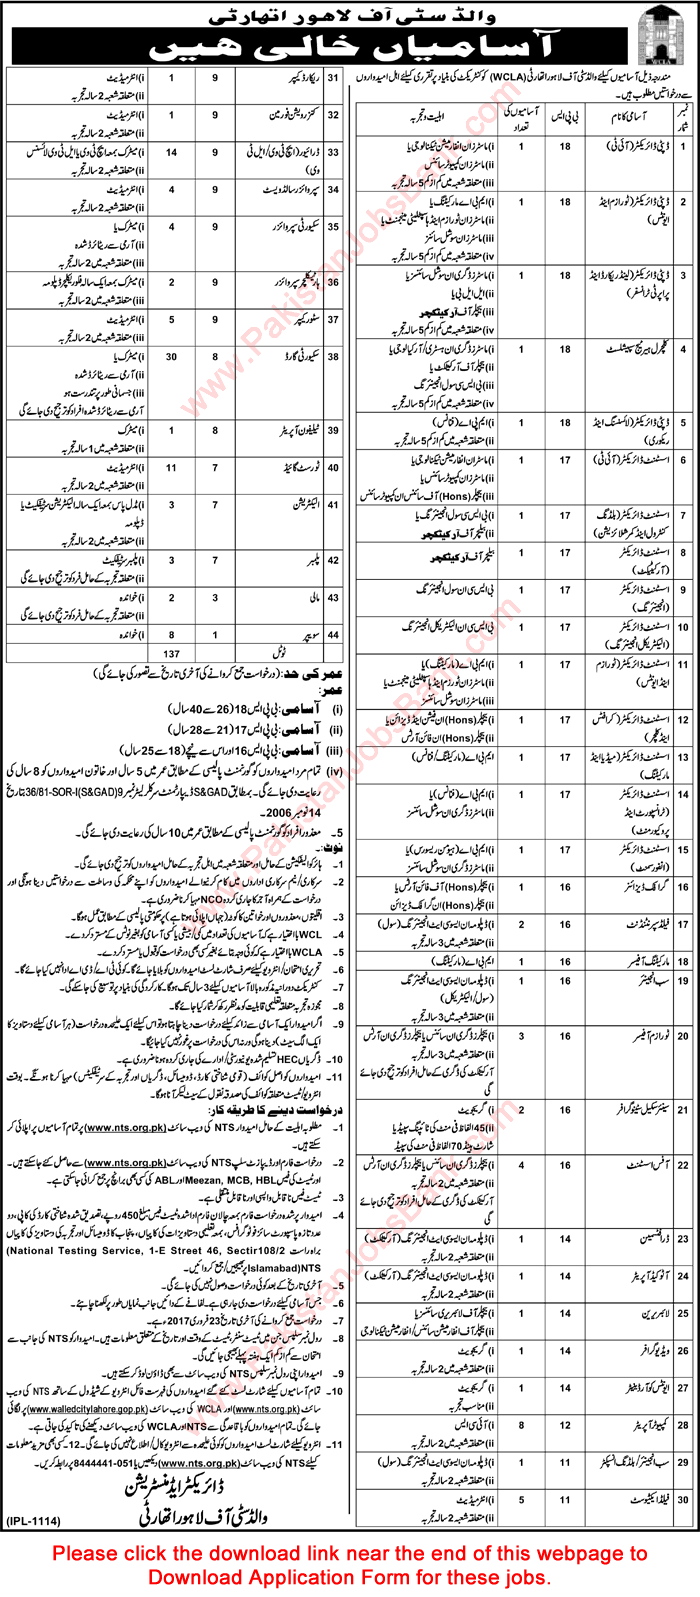 Walled City of Lahore Authority Jobs 2017 February WCLA NTS Application Form Download Latest